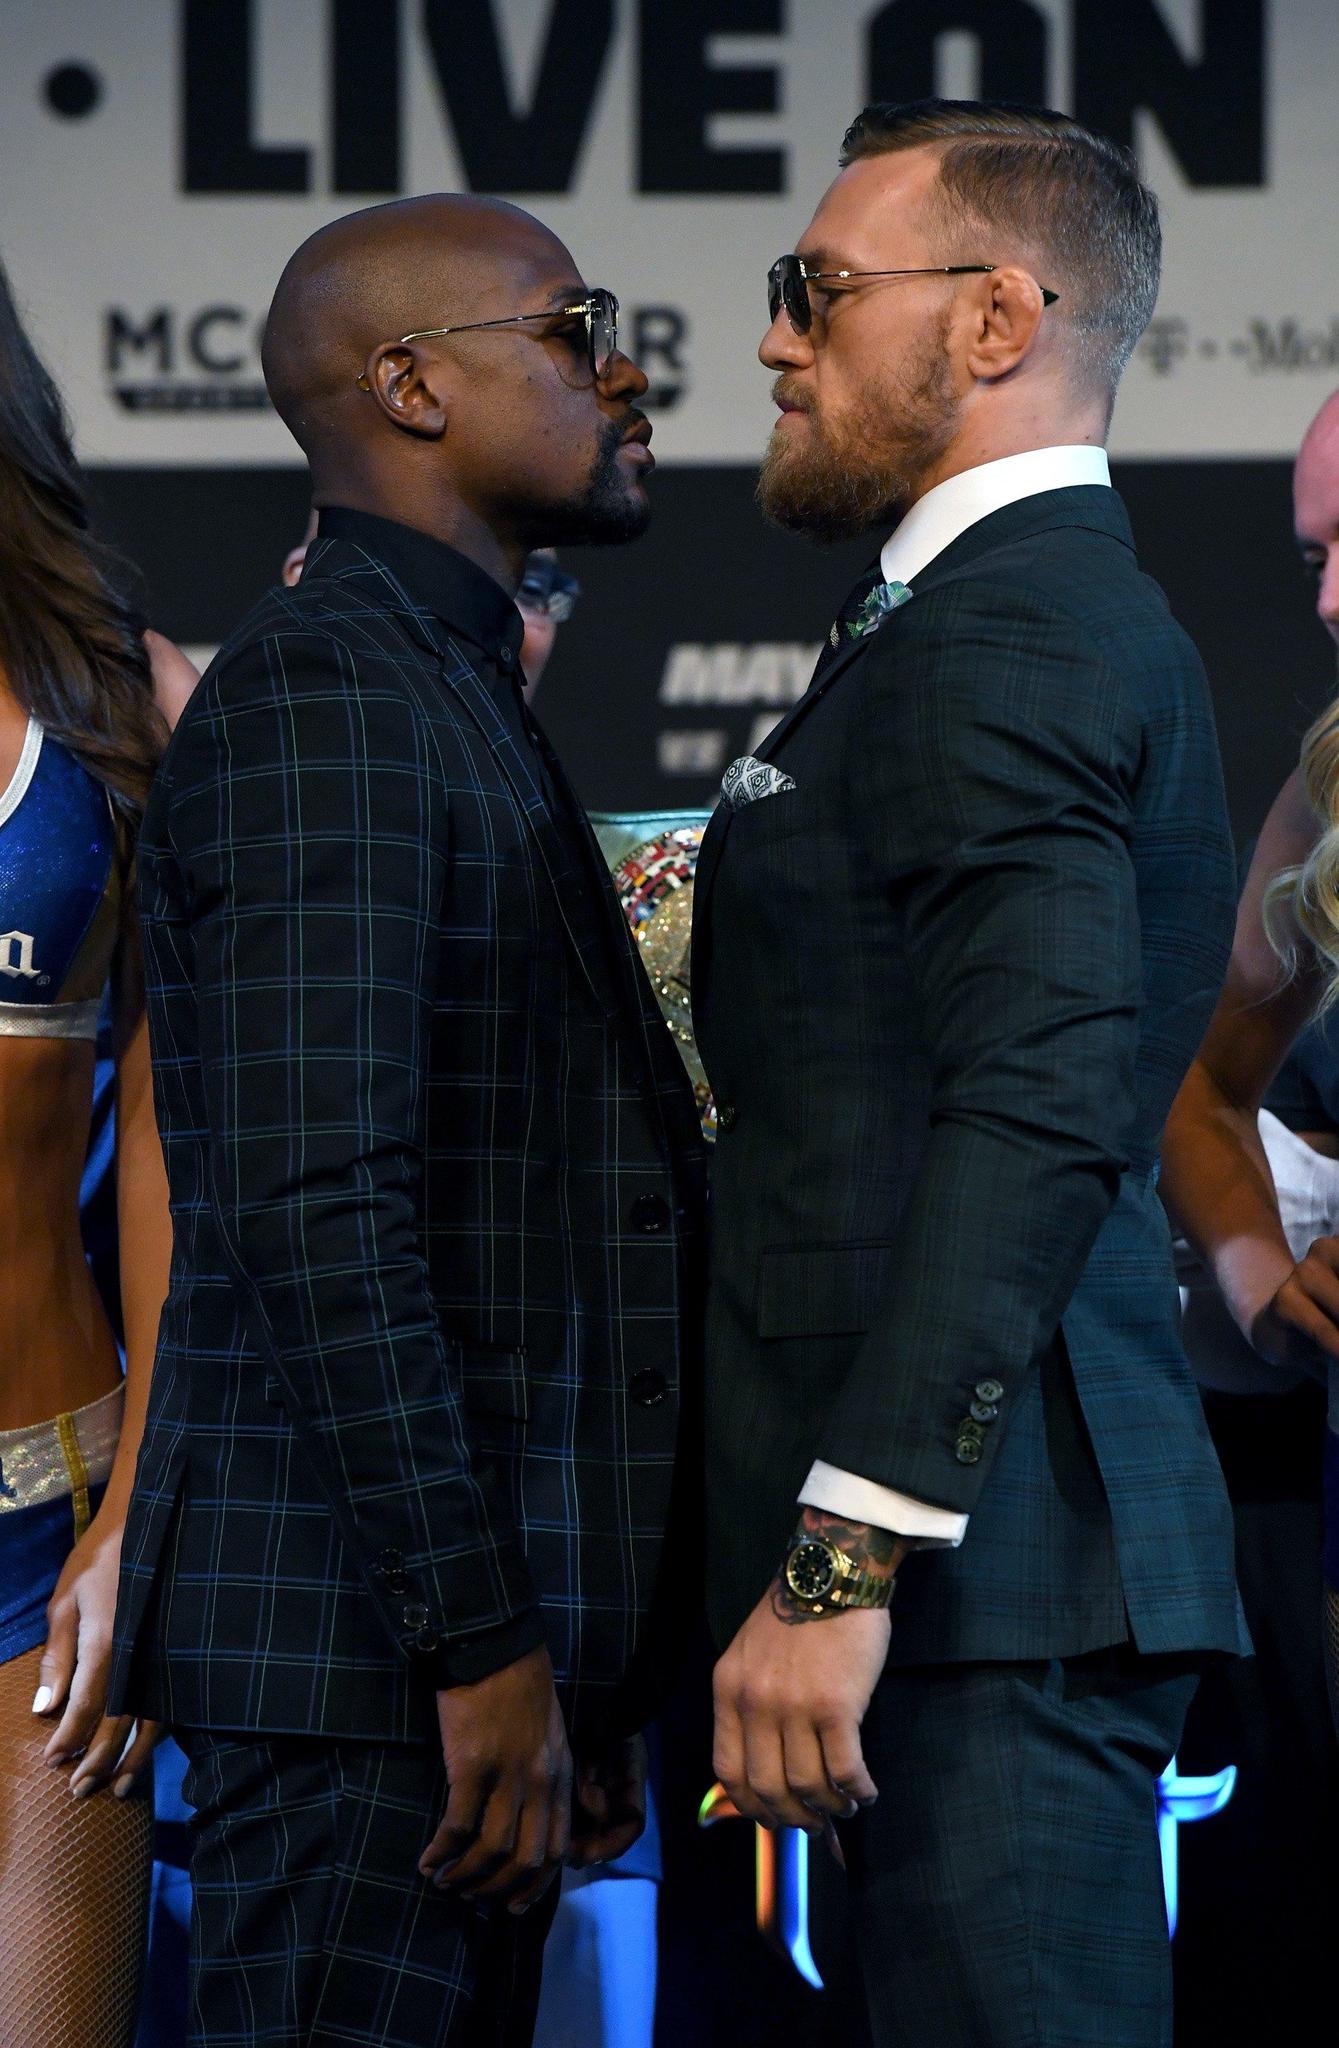 McGregor vs. Mayweather fight leads back to a guilty habit - Chicago Tribune1339 x 2048